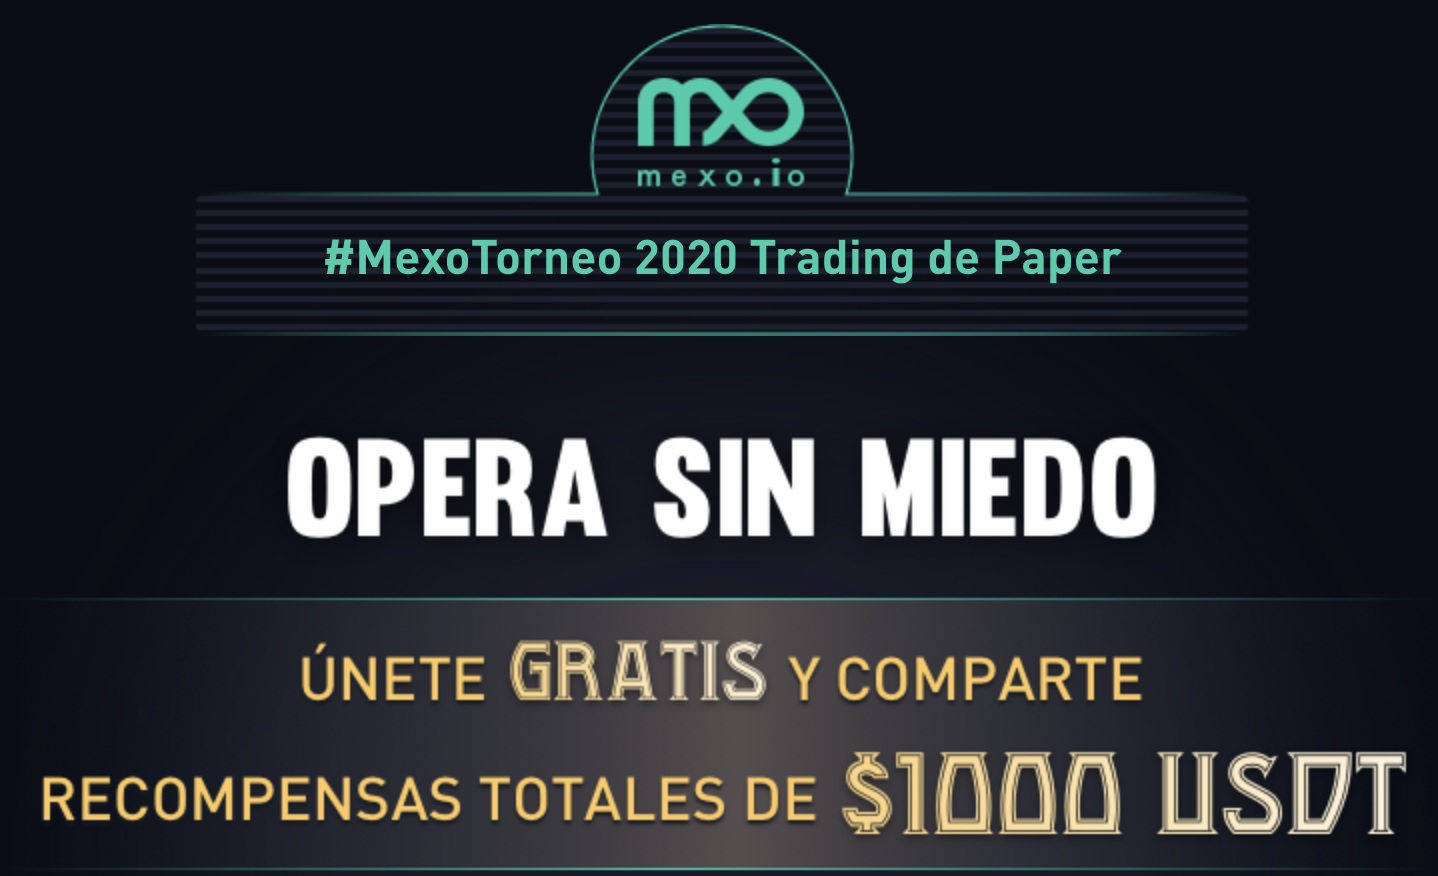 https://event.mexo.io/competition